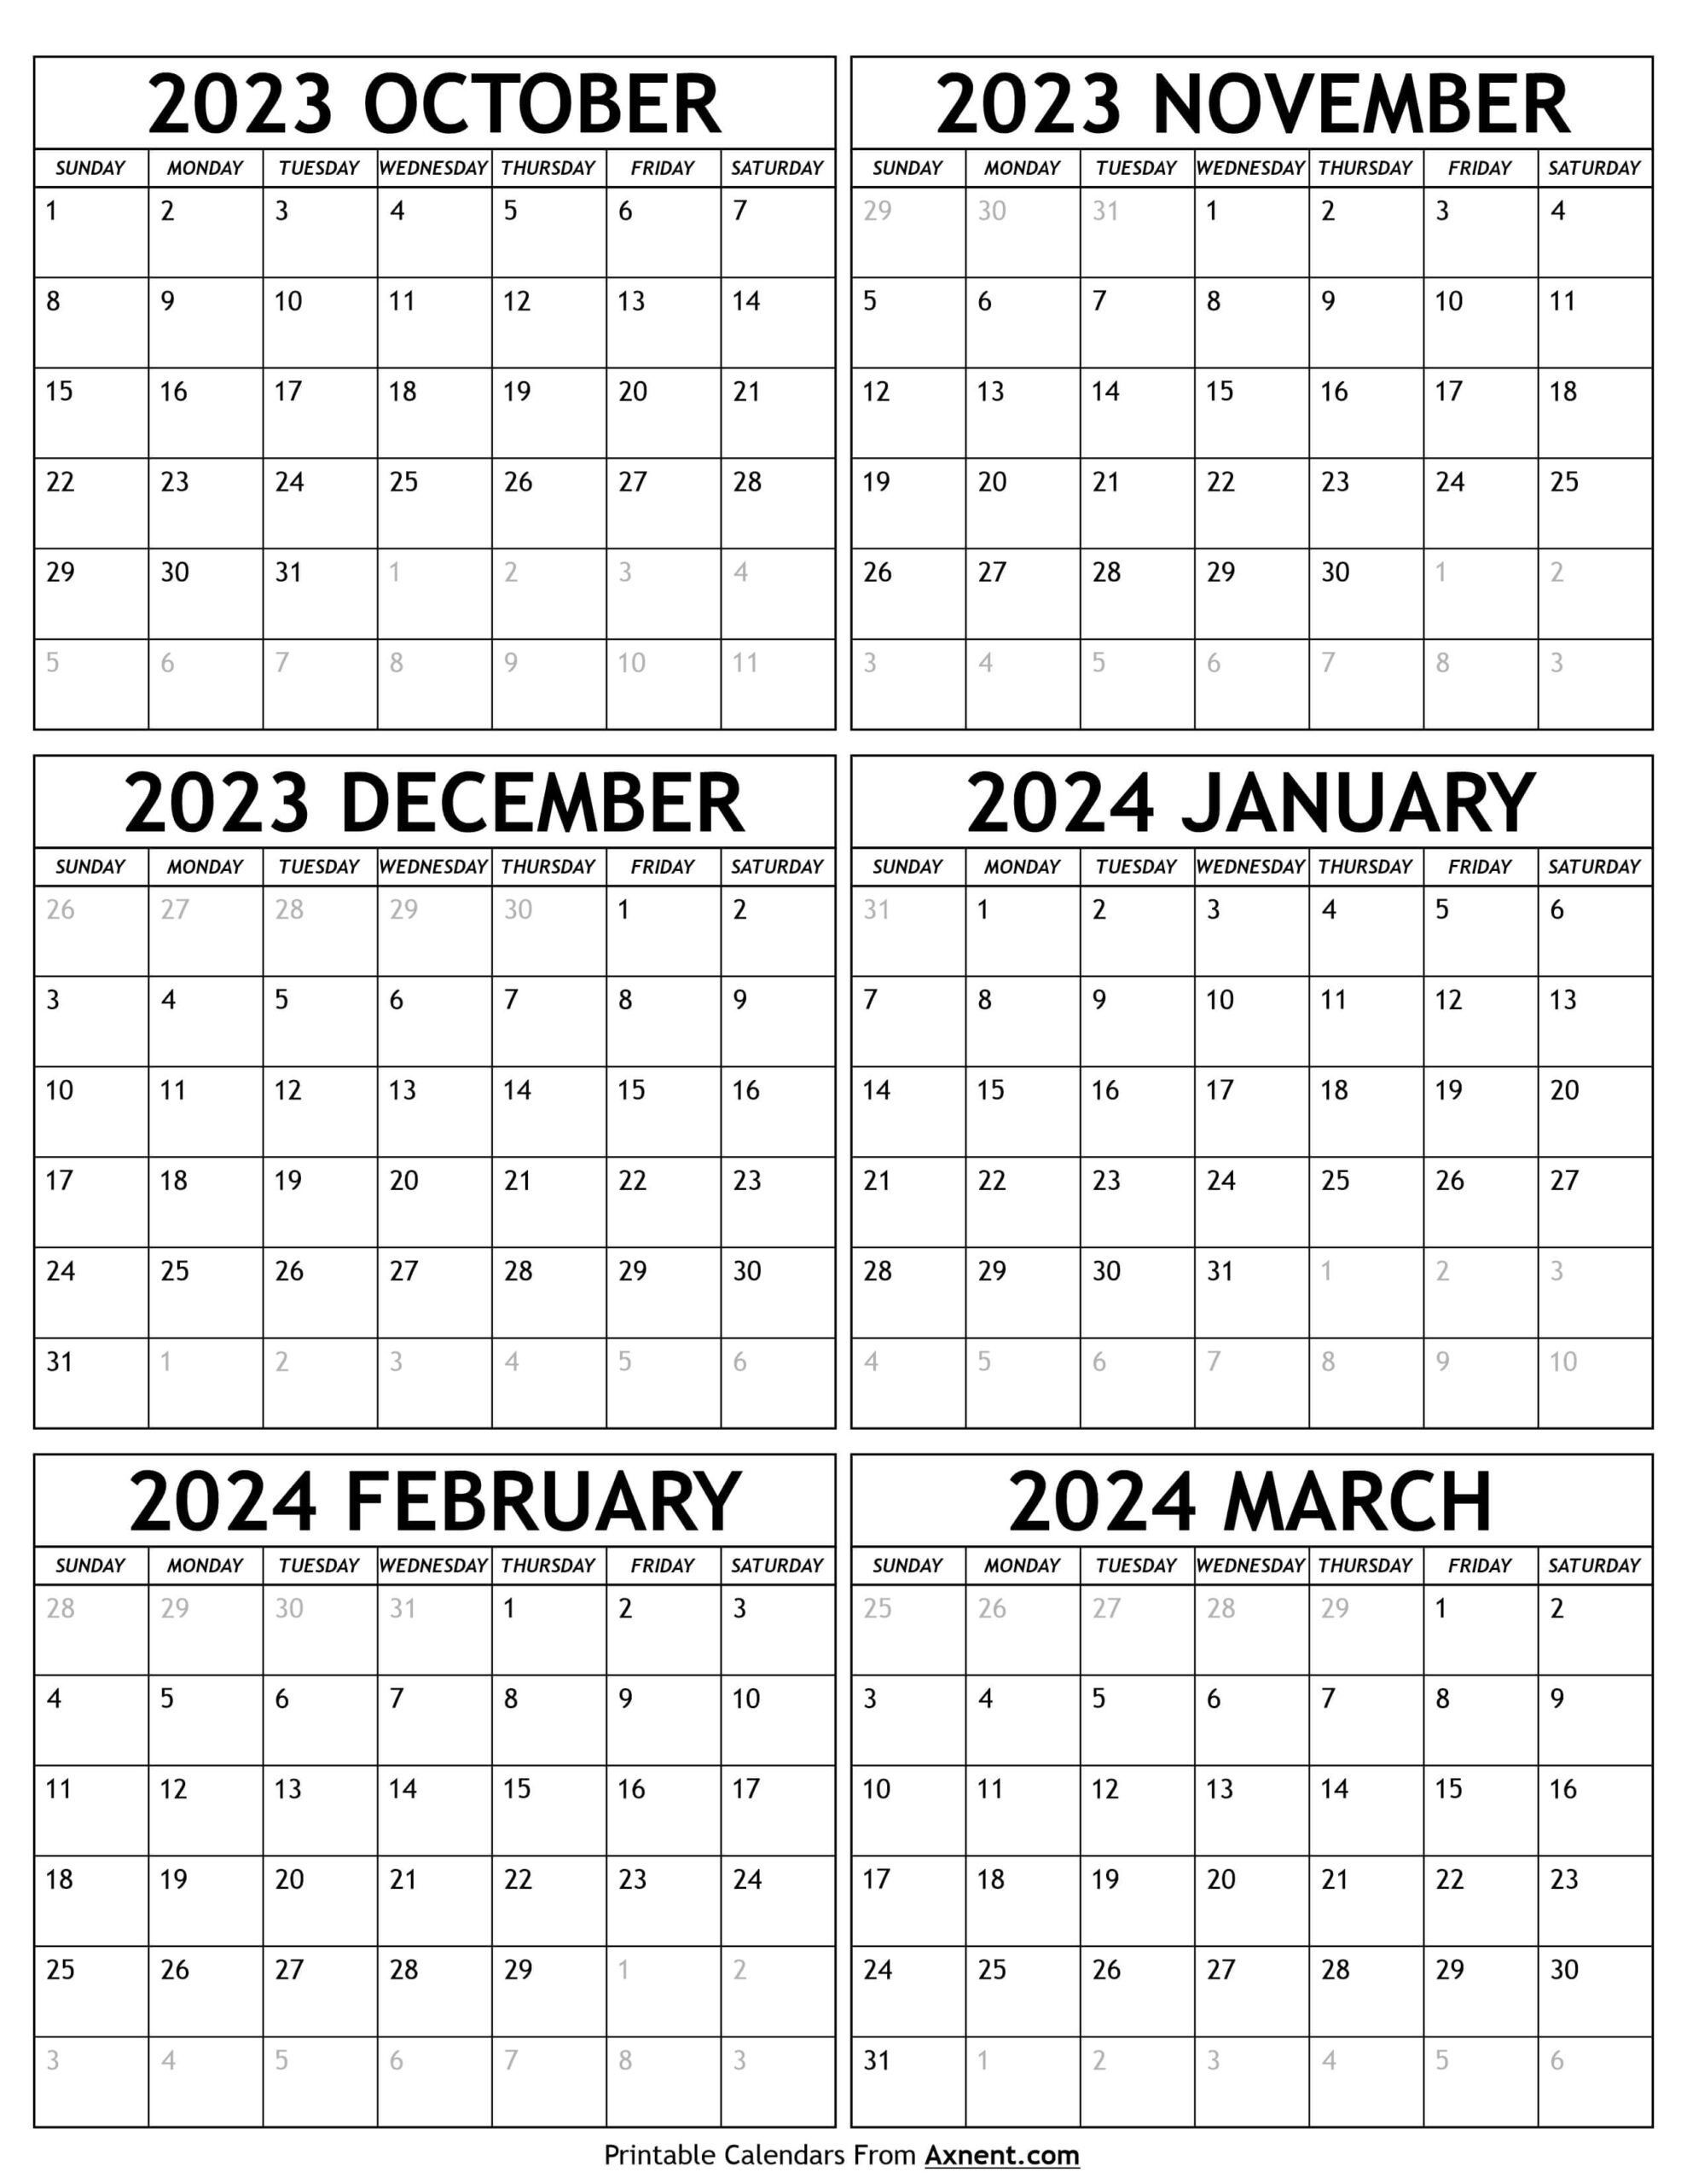 October 2023 To March 2024 Calendar Templates - Six Months for Printable Calendar October 2023 To September 2024